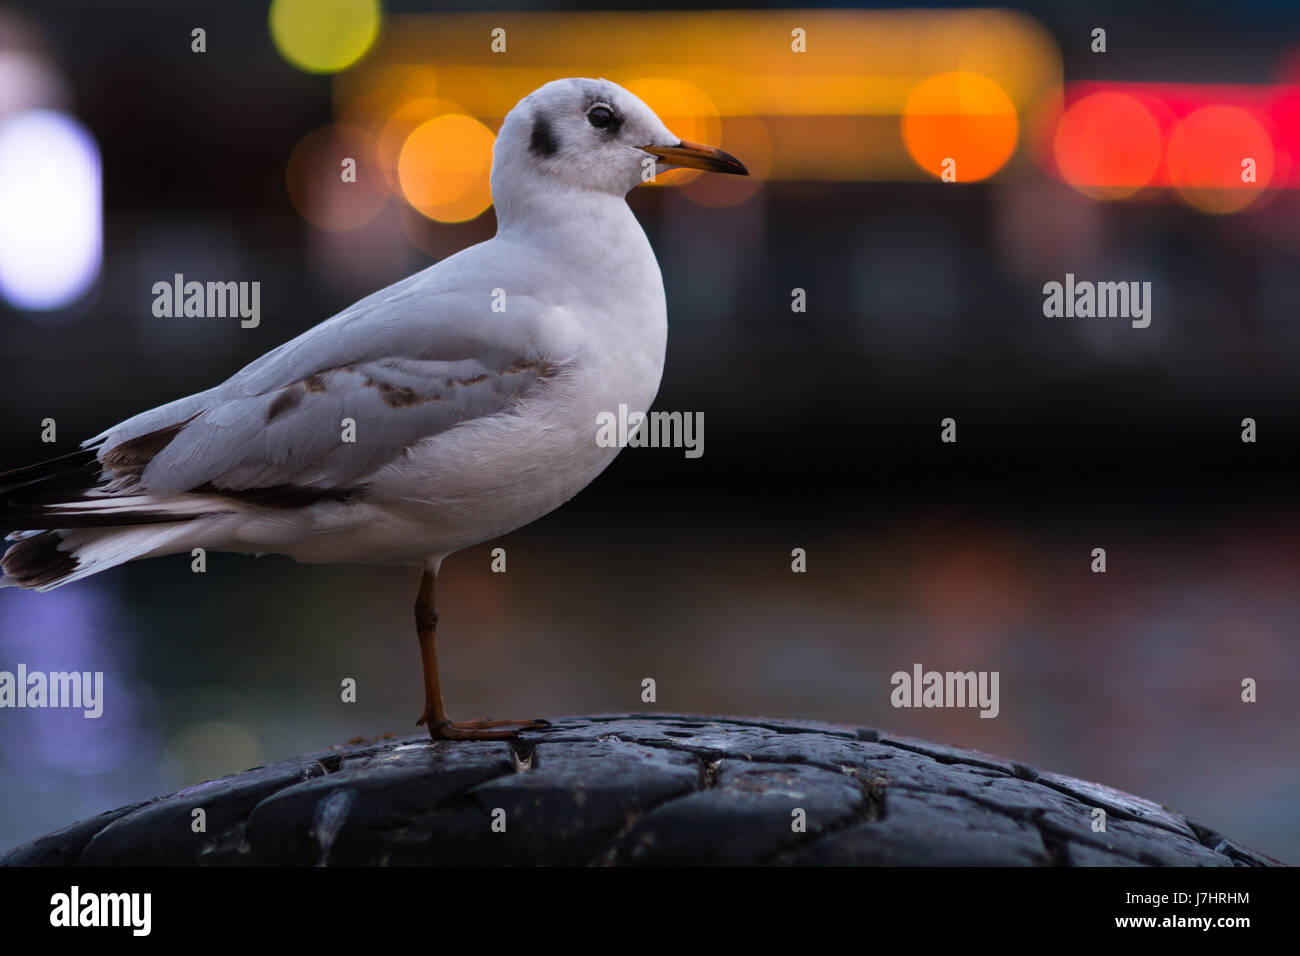 Seagull standing on one leg on a tire Stock Photo